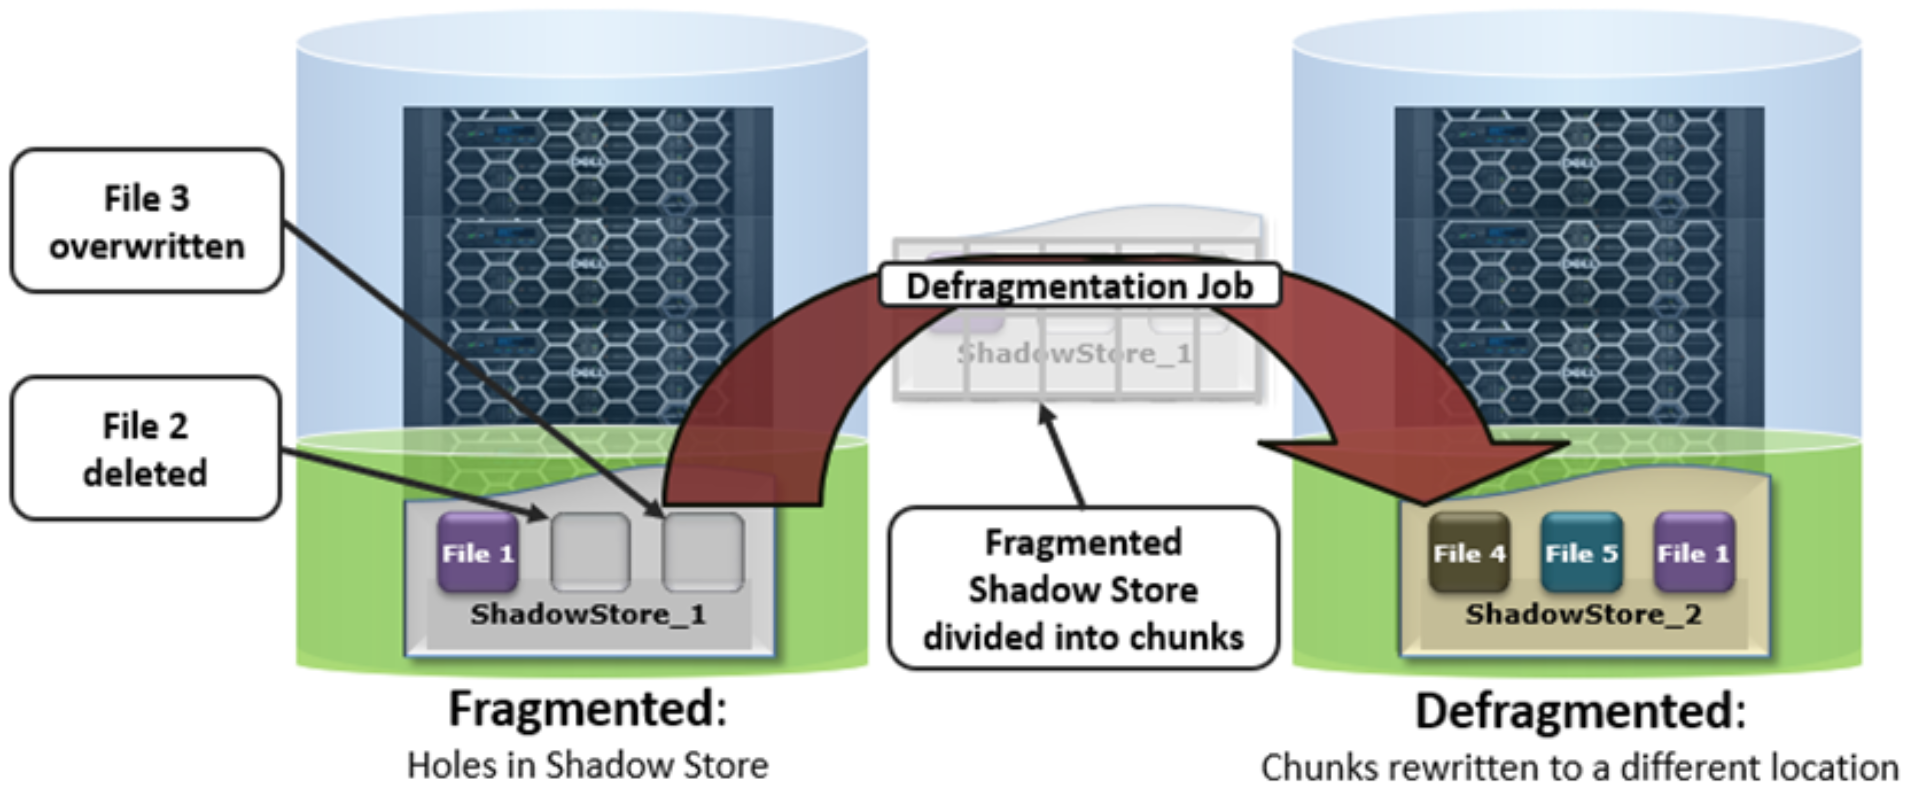 Graphic showing the OneFS defragmenter's operation, which reduces fragmentation resulting in overwrites and deletes of files. This defragmenter is integrated into the ShadowStoreDelete job. 